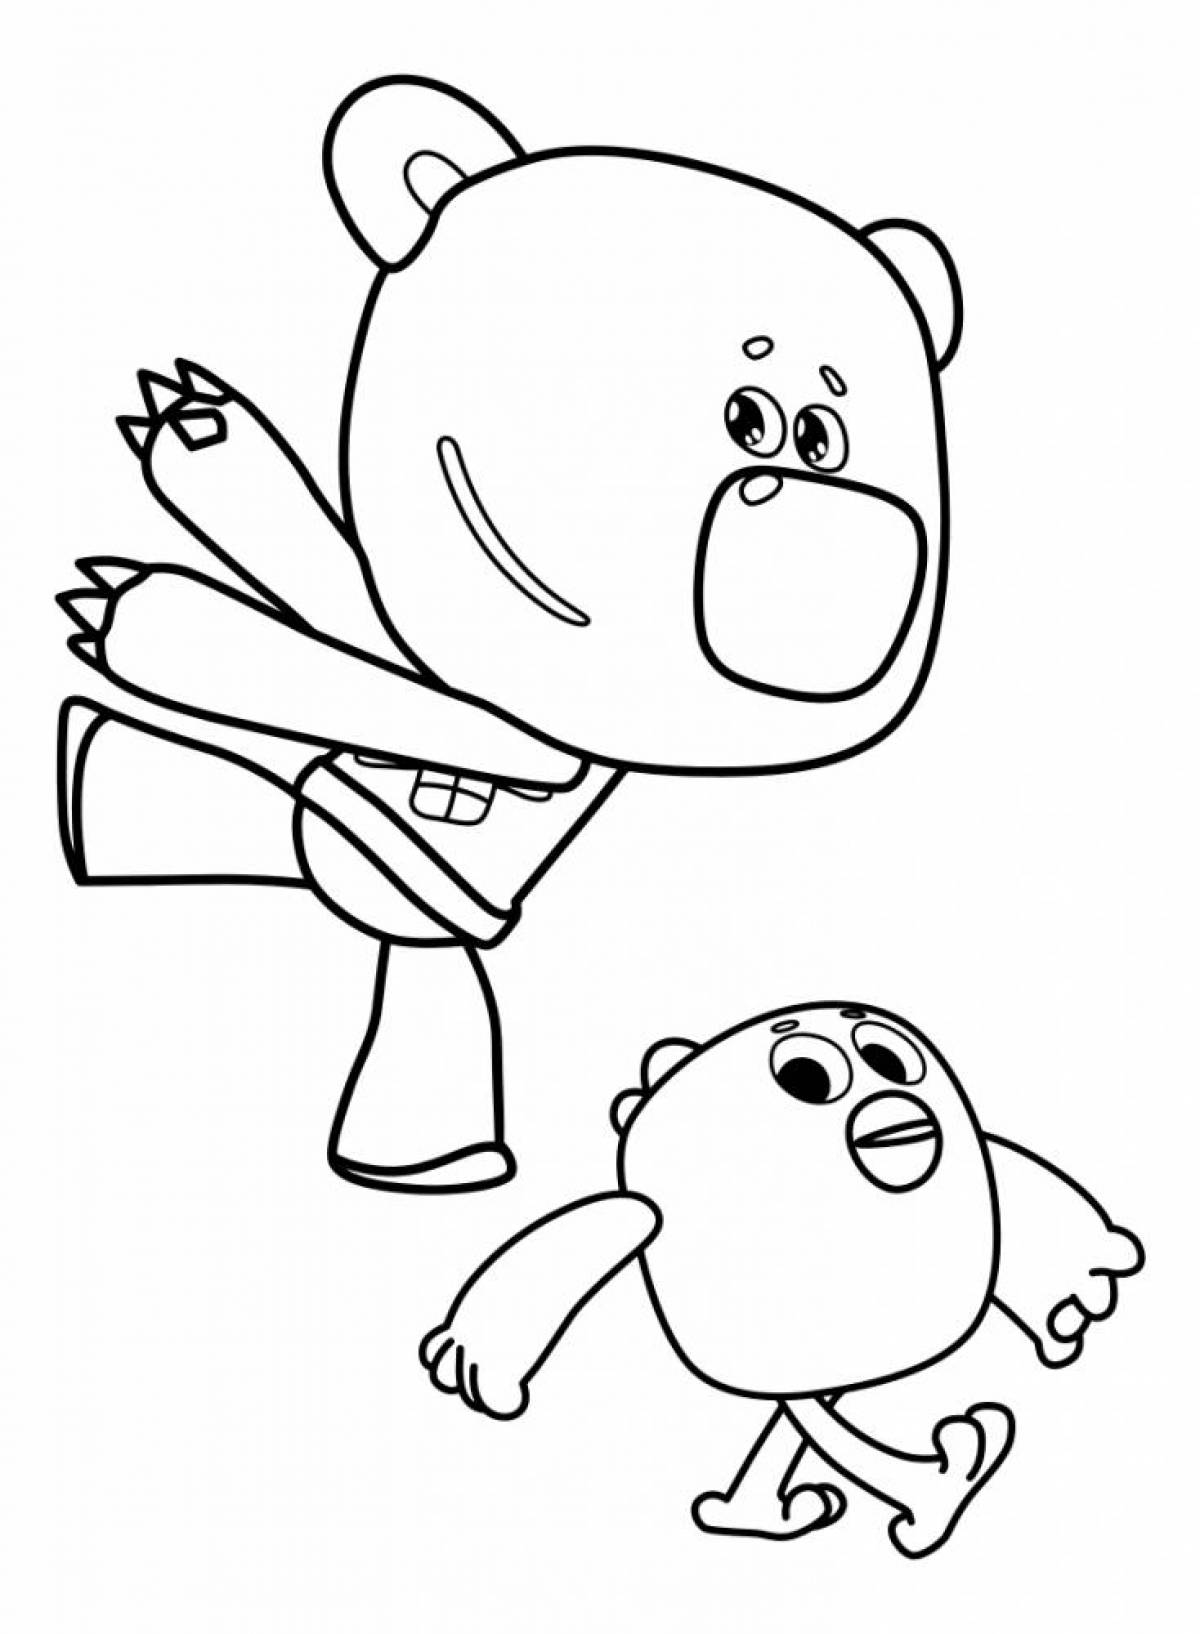 Furry bear coloring pages